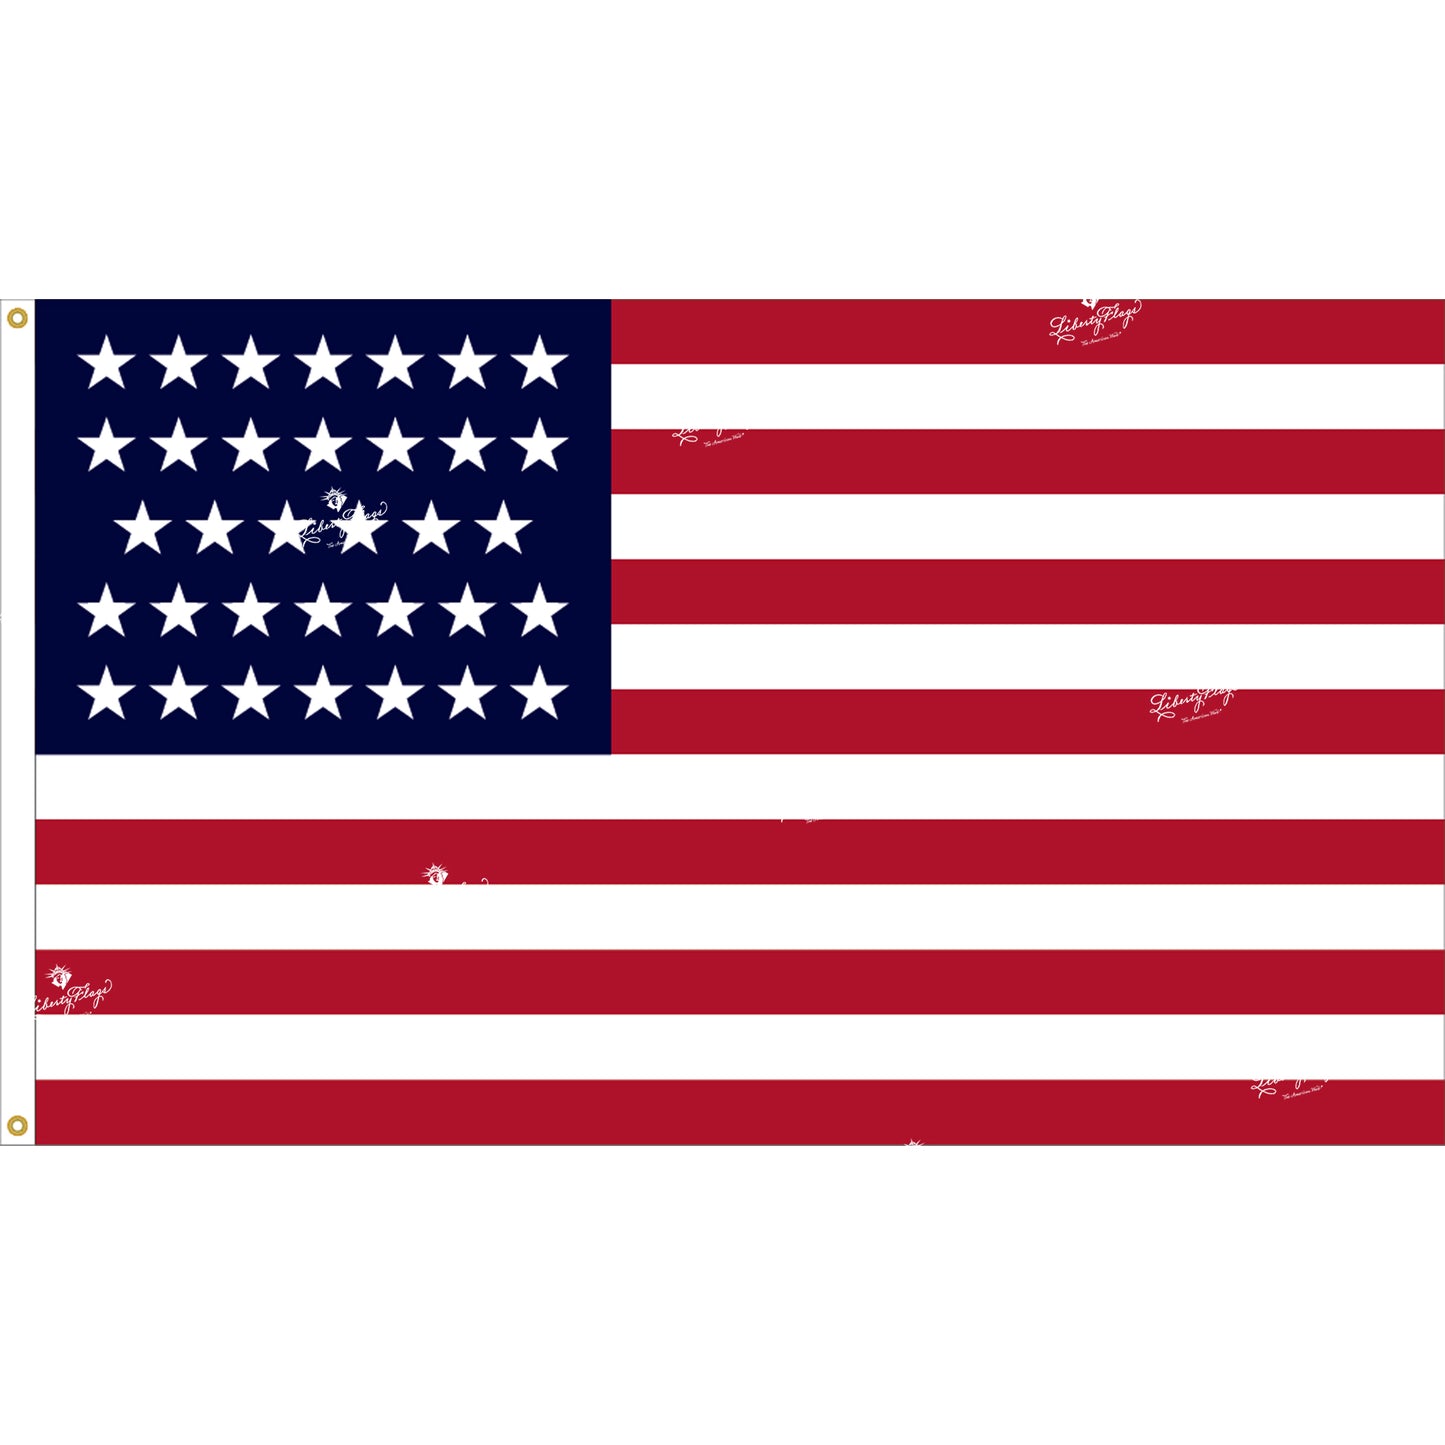 34 Star Outdoor Historic U.S. Flags (dyed)